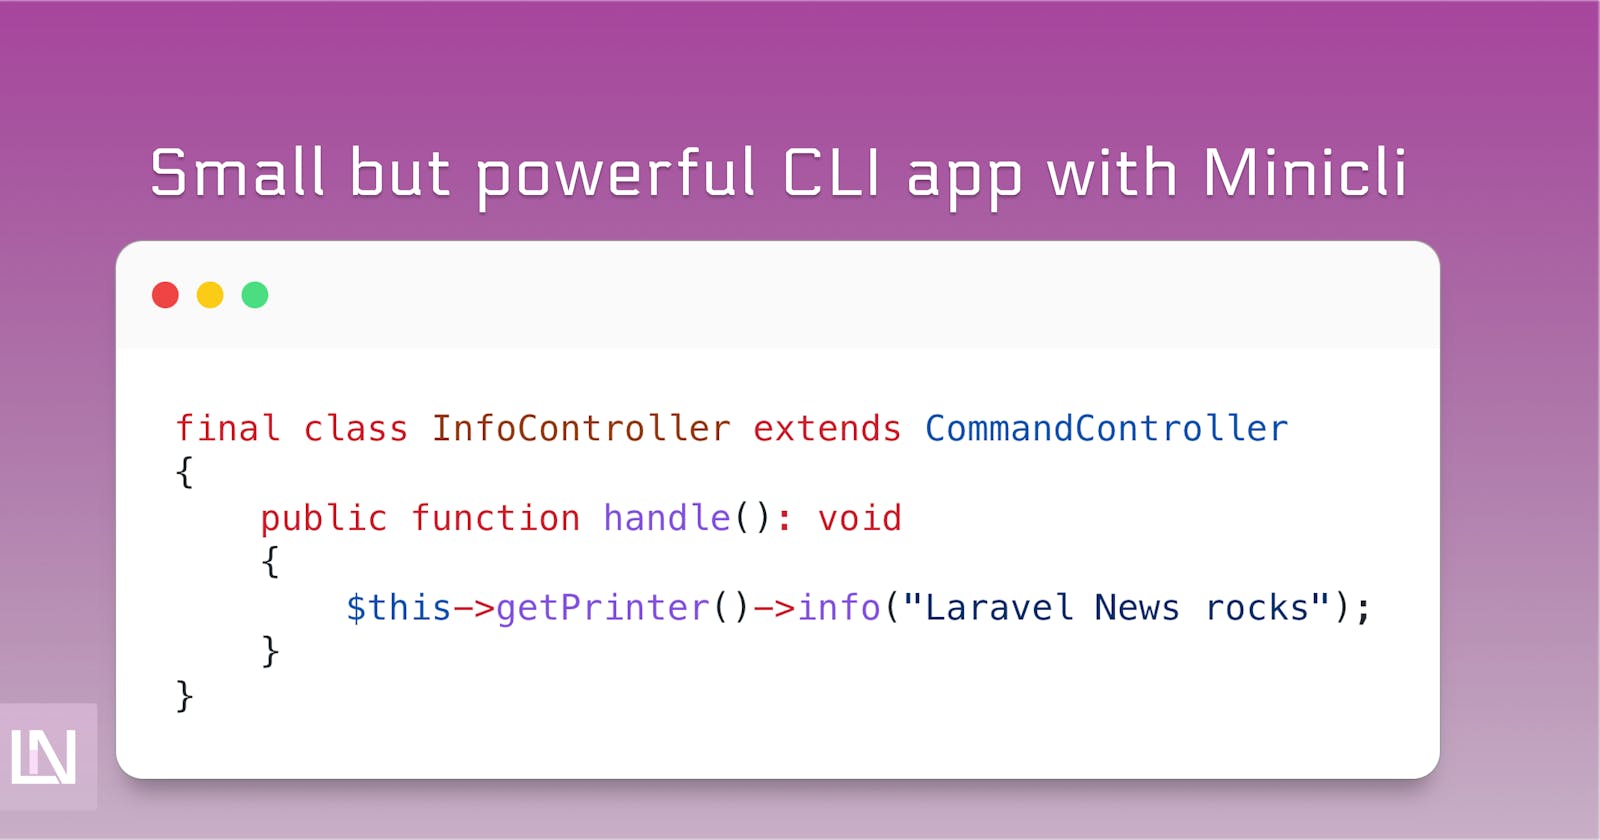 Small but powerful CLI apps with Minicli